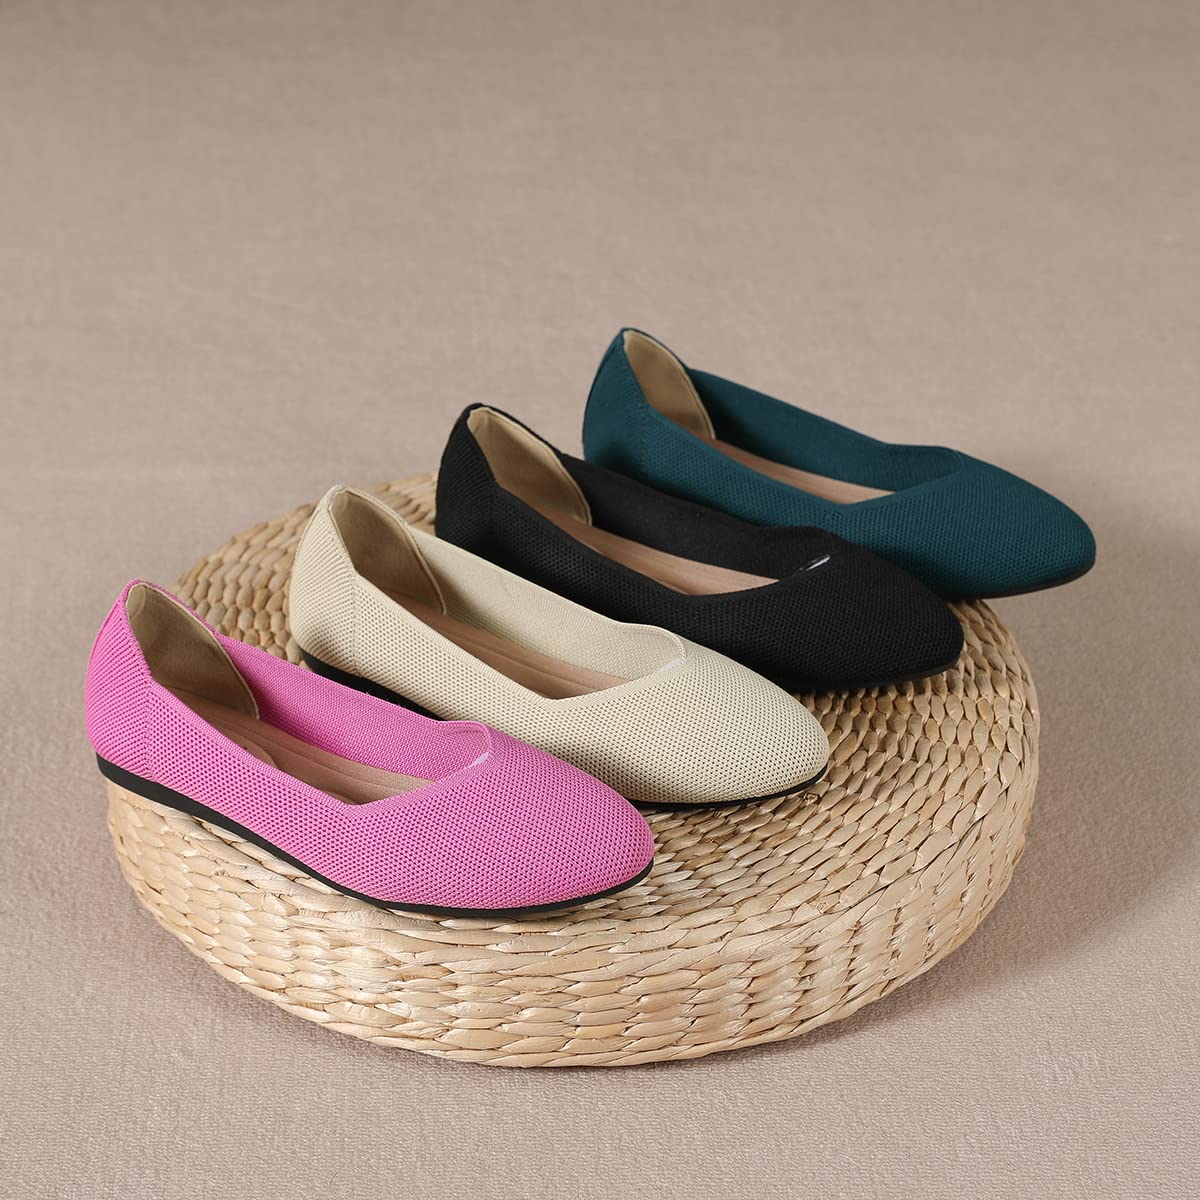 Semwiss Round Toe Flats for Women Dressy Comfortable, Knit Ballet Flat Shoes Casual Shoes Walking Flats Office Shoes.